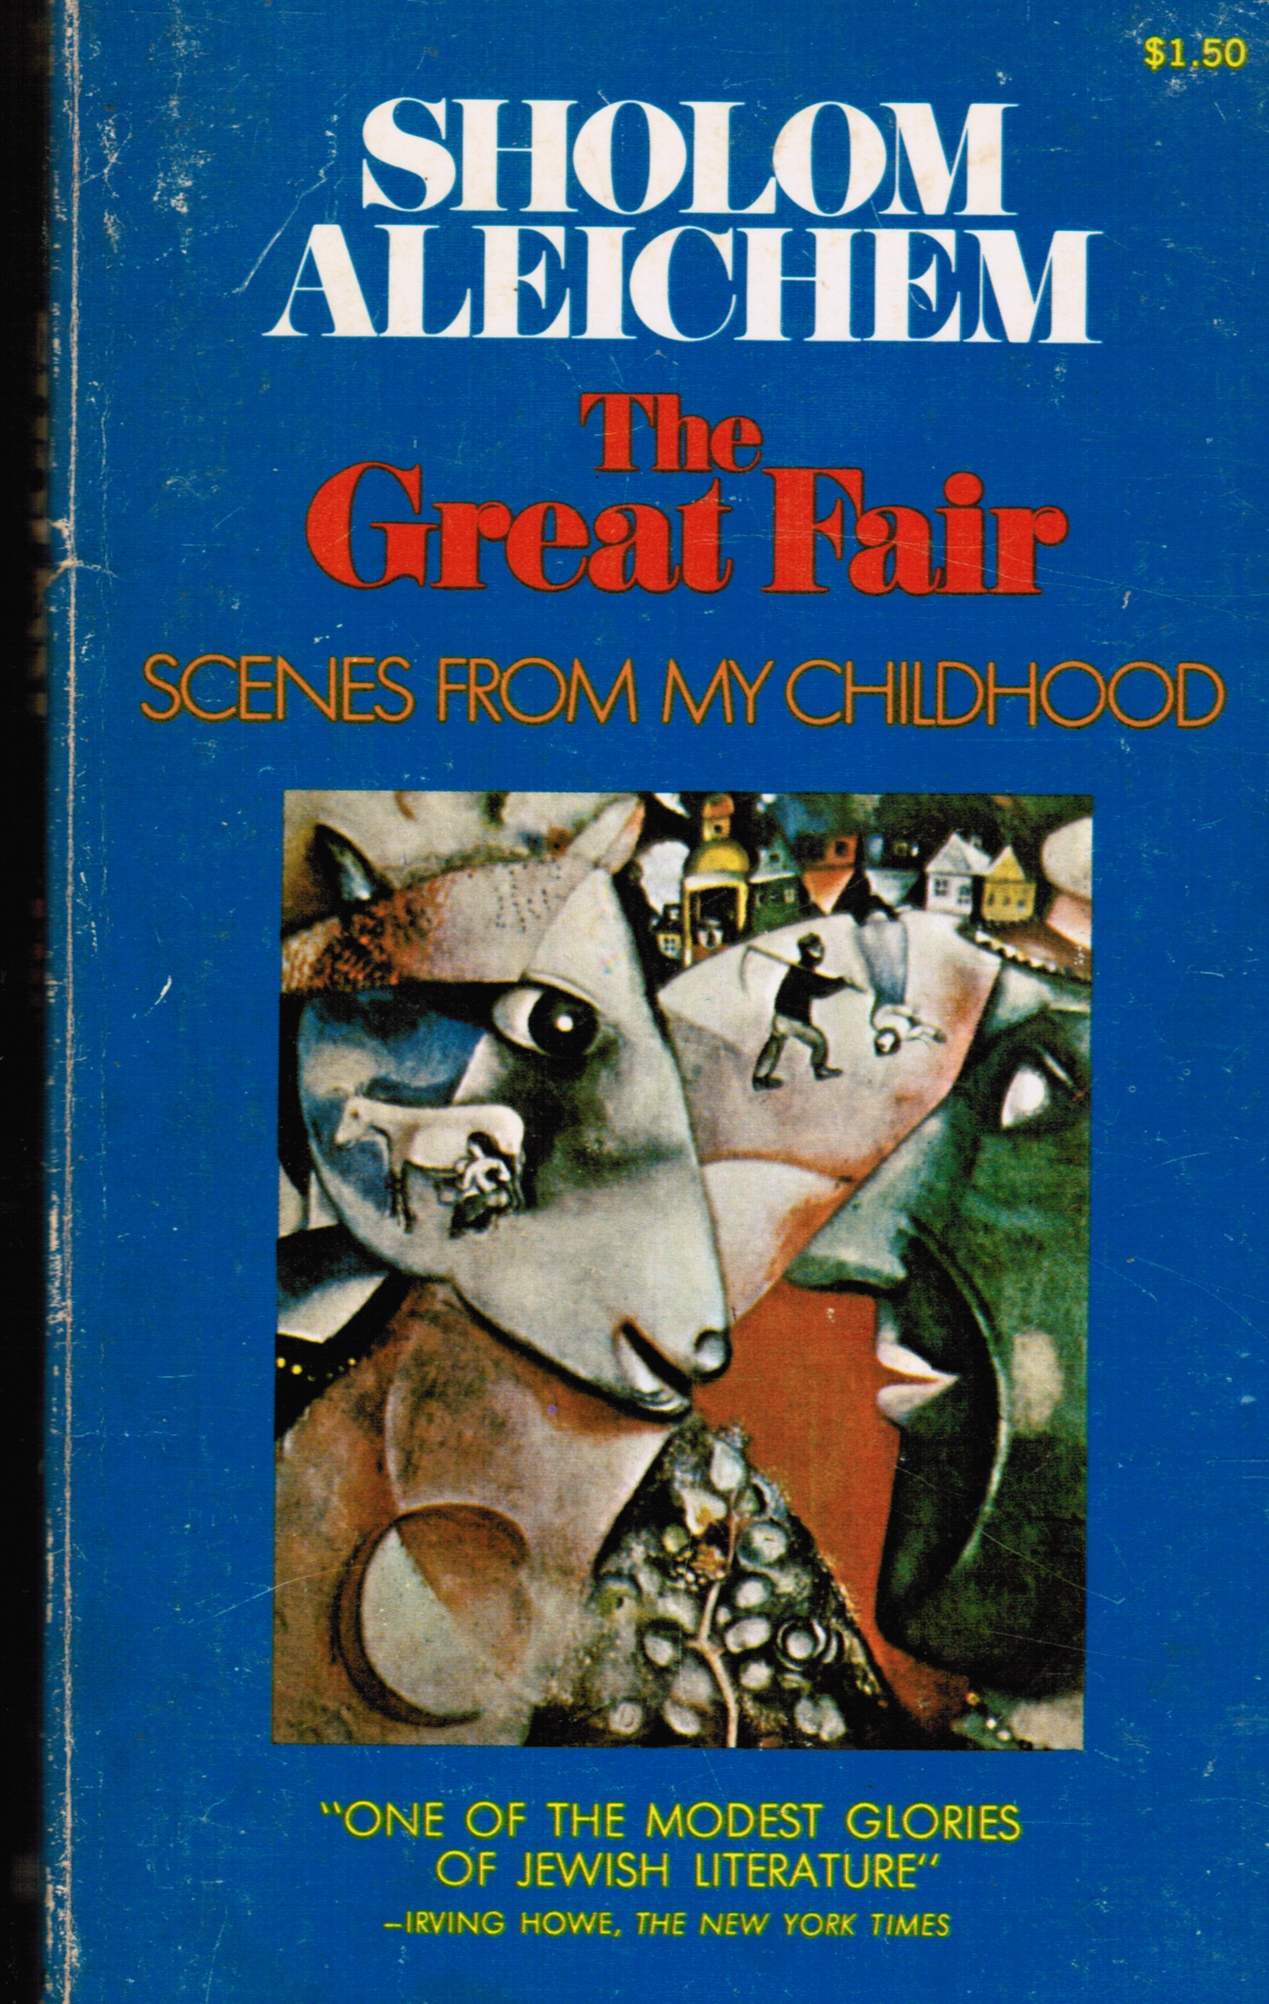 ALEICHEM, SHOLOM - The Great Fair: Scenes from My Childhood